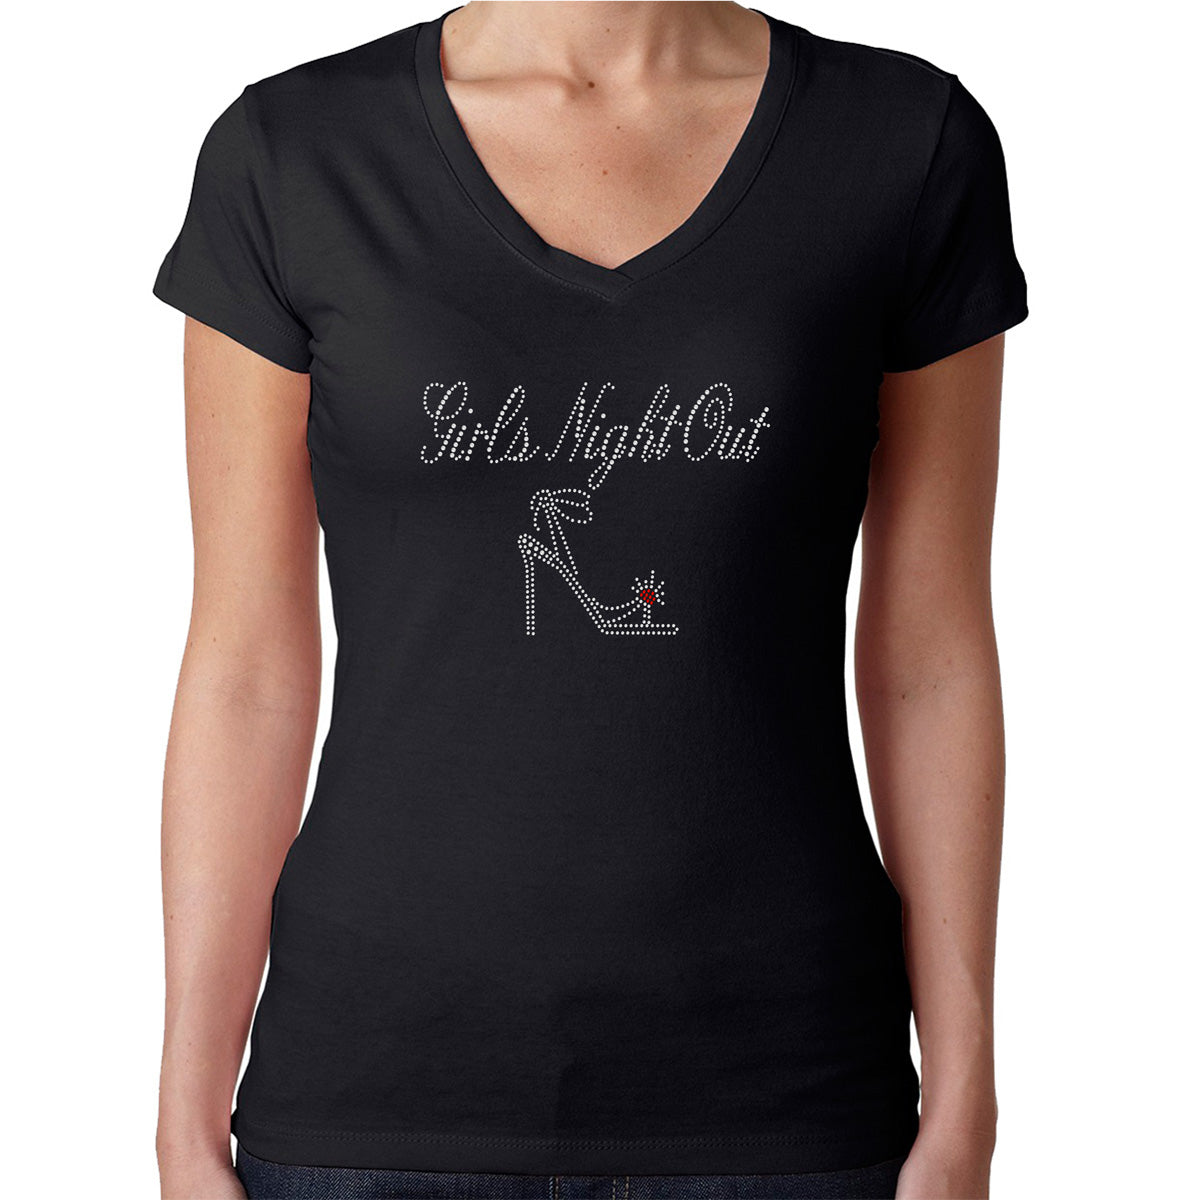 Womens T-Shirt Rhinestone Bling Black Fitted Tee Girls Night Out Heels